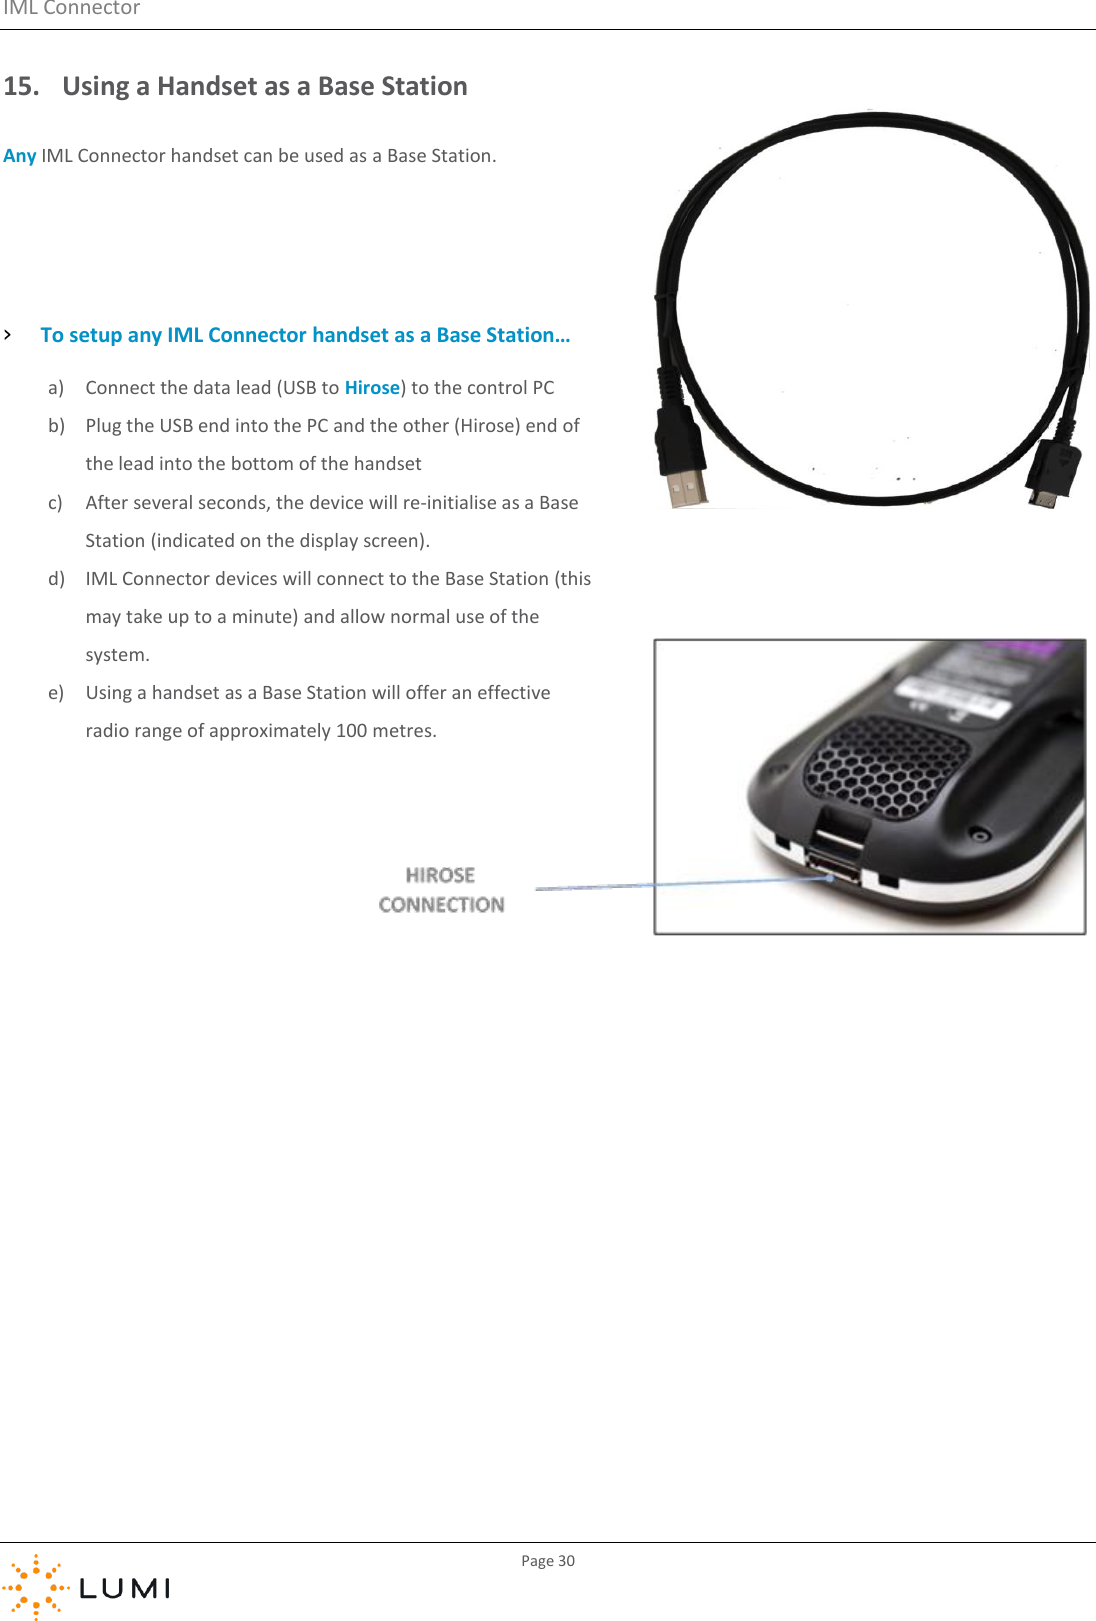 IML Connector         Page 30  15. Using a Handset as a Base Station Any IML Connector handset can be used as a Base Station.   › To setup any IML Connector handset as a Base Station… a) Connect the data lead (USB to Hirose) to the control PC b) Plug the USB end into the PC and the other (Hirose) end of the lead into the bottom of the handset c) After several seconds, the device will re-initialise as a Base Station (indicated on the display screen). d) IML Connector devices will connect to the Base Station (this may take up to a minute) and allow normal use of the system. e) Using a handset as a Base Station will offer an effective radio range of approximately 100 metres.    